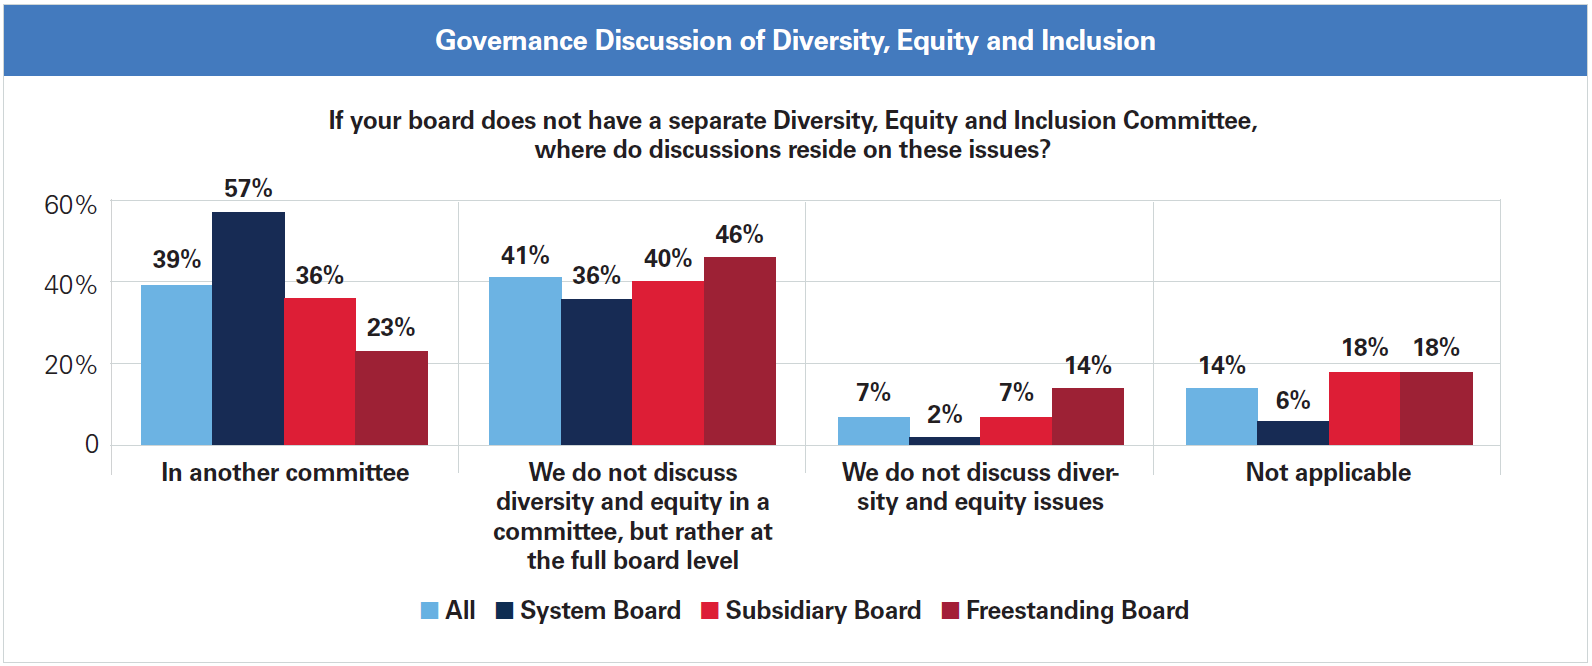 Figure: Governance Discussion of Diversity, Equity and Inclusion. If your board does not have separate Diversity, Equity and Inclusion Committee, where do discussions reside on these issues? In another committee: All: 39%; System Board: 57%; Subsidiary Board 36%; Freestanding Board: 23%. We do not discuss diversity and equity in a committee, but rather at the full board level: All: 41%; System Board: 36%; Subsidiary Board: 40%; Freestanding Board: 46%. We do not discuss diversity and equity issues: All: 7%; System Board: 2%; Subsidiary Board: 7%; Freestanding Board: 14%. Not applicable: All: 14%; System Board: 6%; Subsidiary Board: 18%; Freestanding Board: 18%.